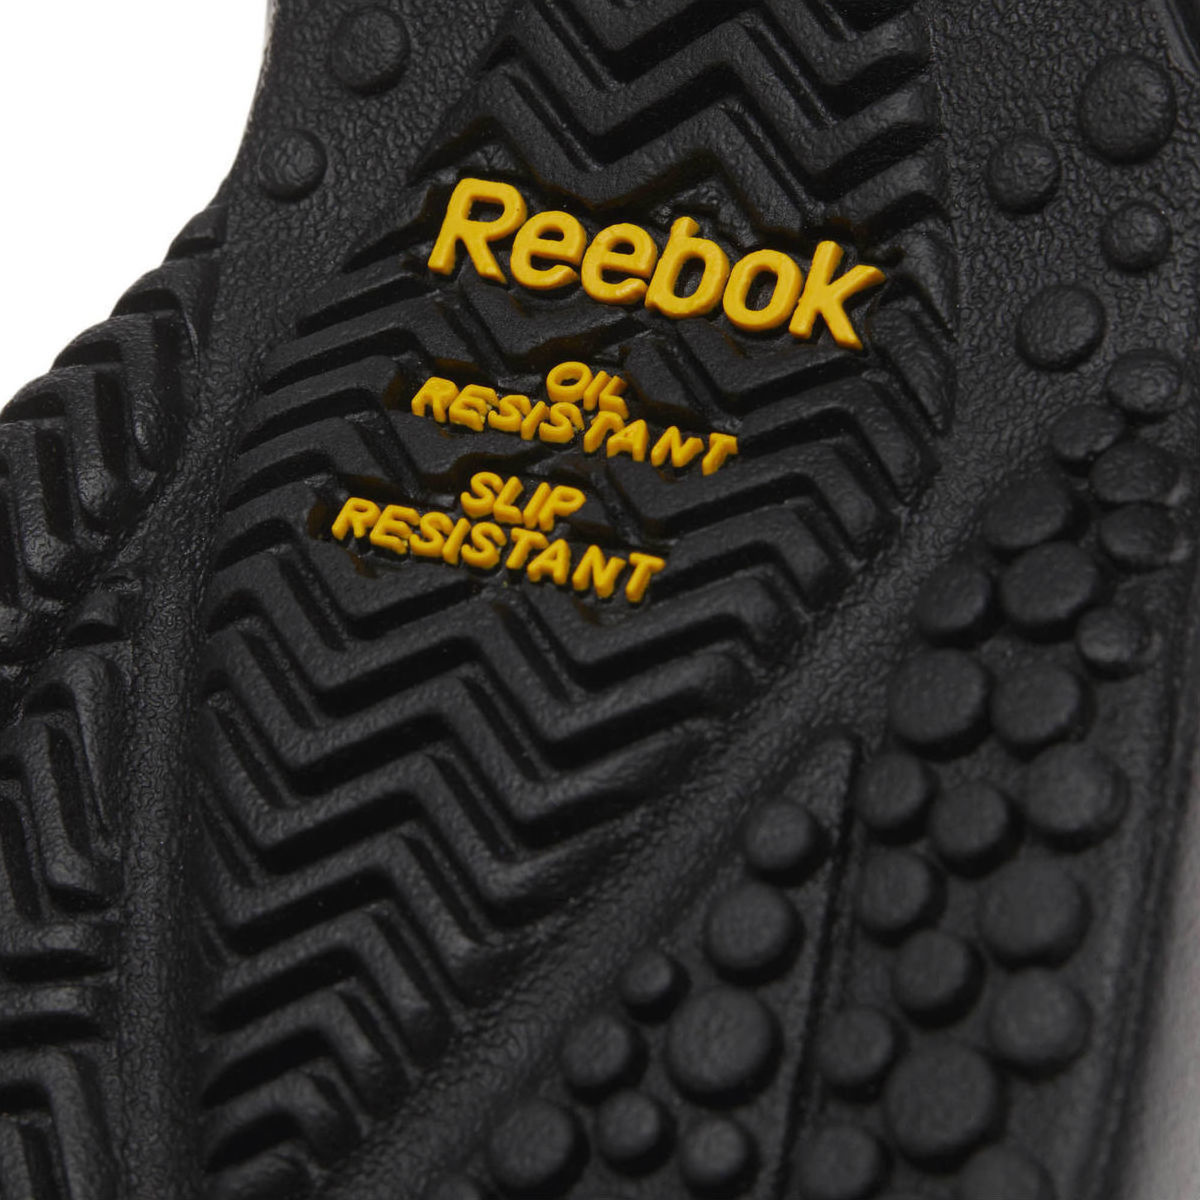 reebok oil and slip resistant shoes